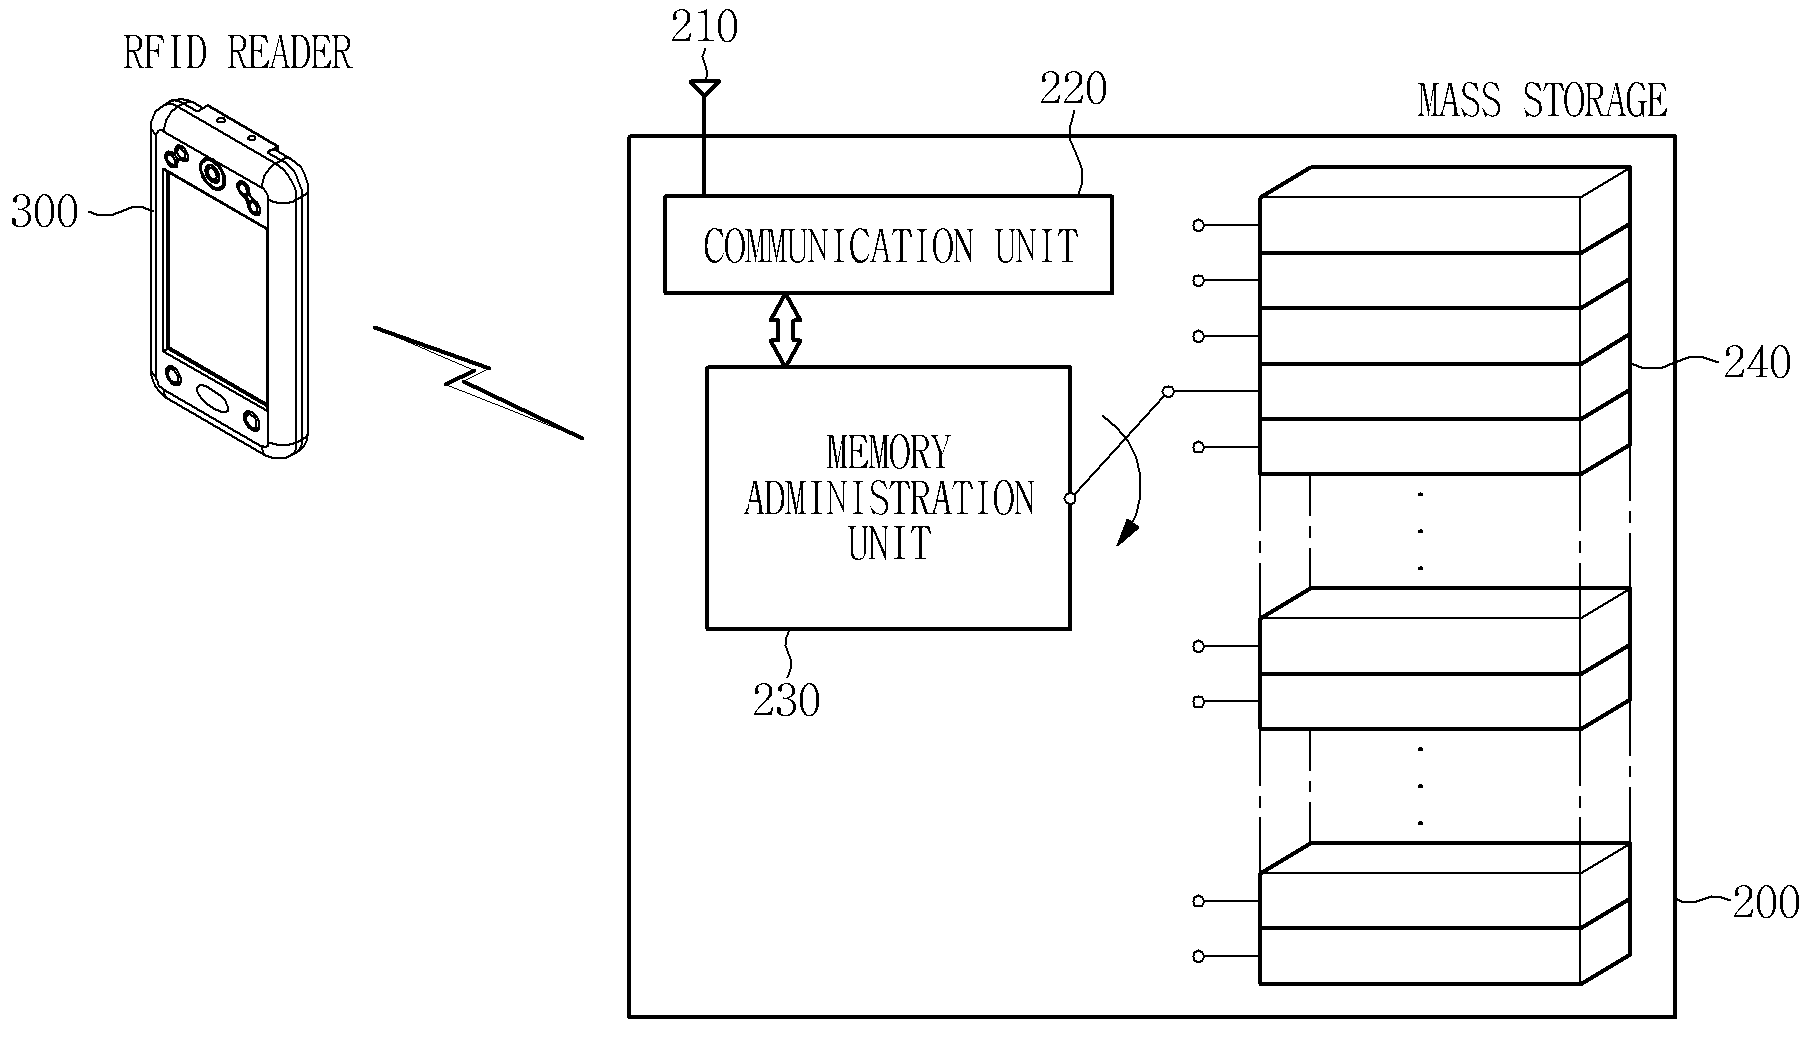 Data streaming apparatus for radio frequency identification tag